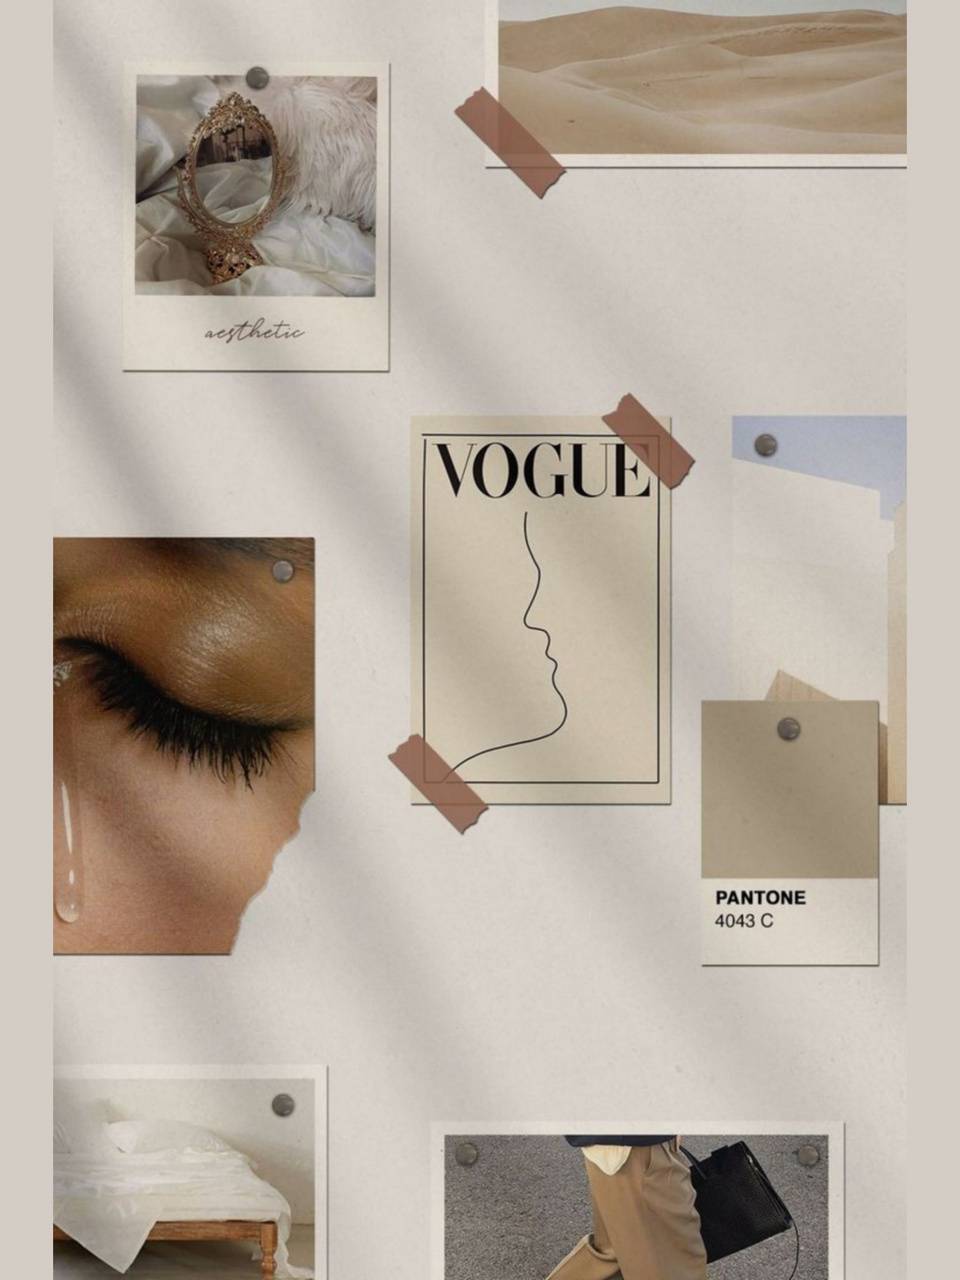 Vogue wallpapers by mmgmb